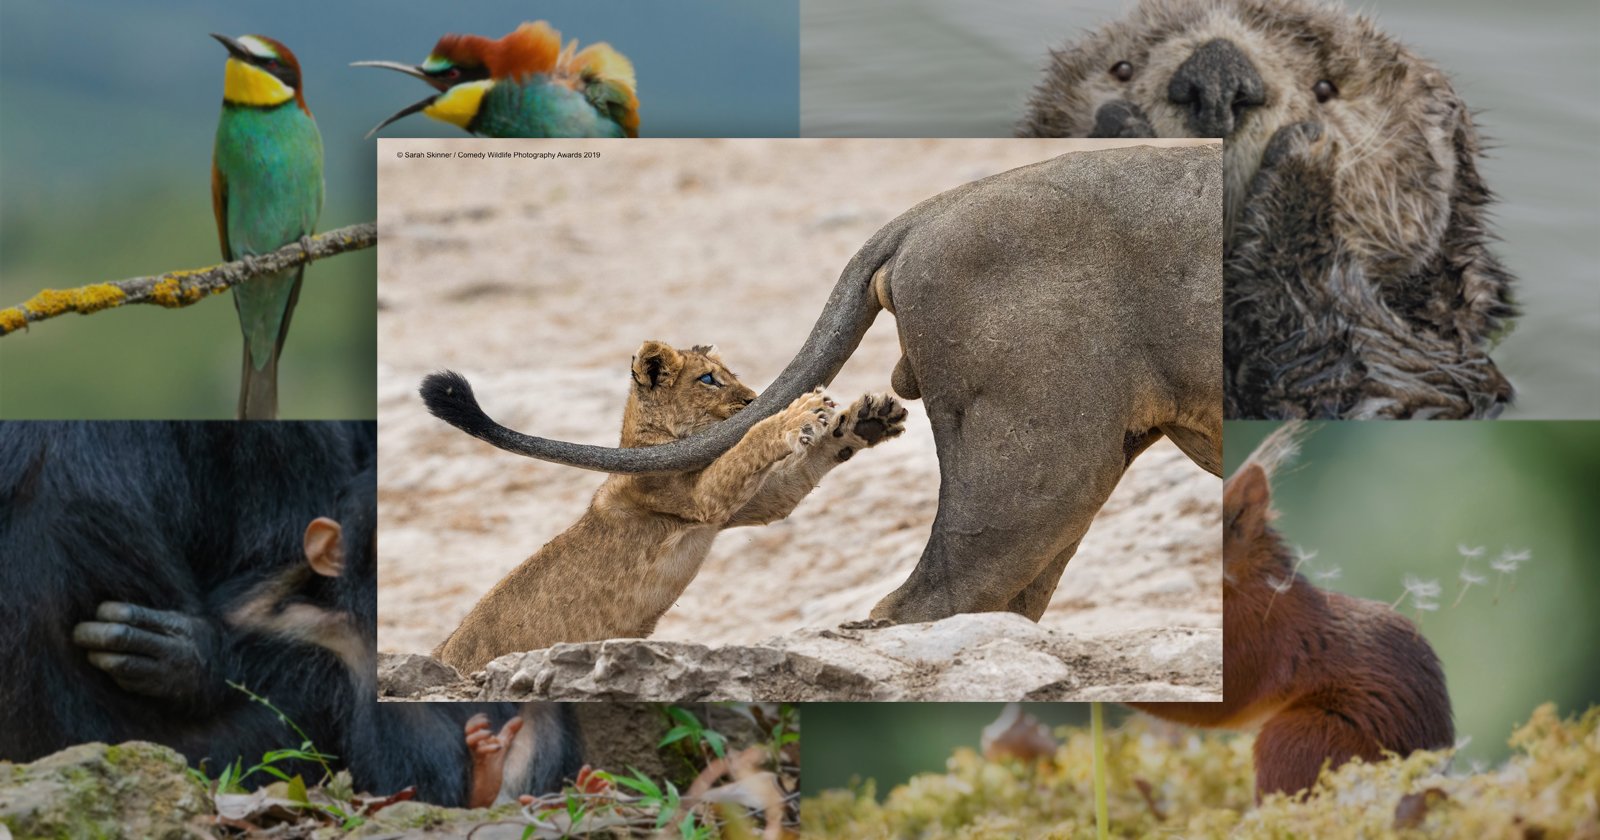 See the Hilarious Winners of the 2019 Comedy Wildlife Photography Awards